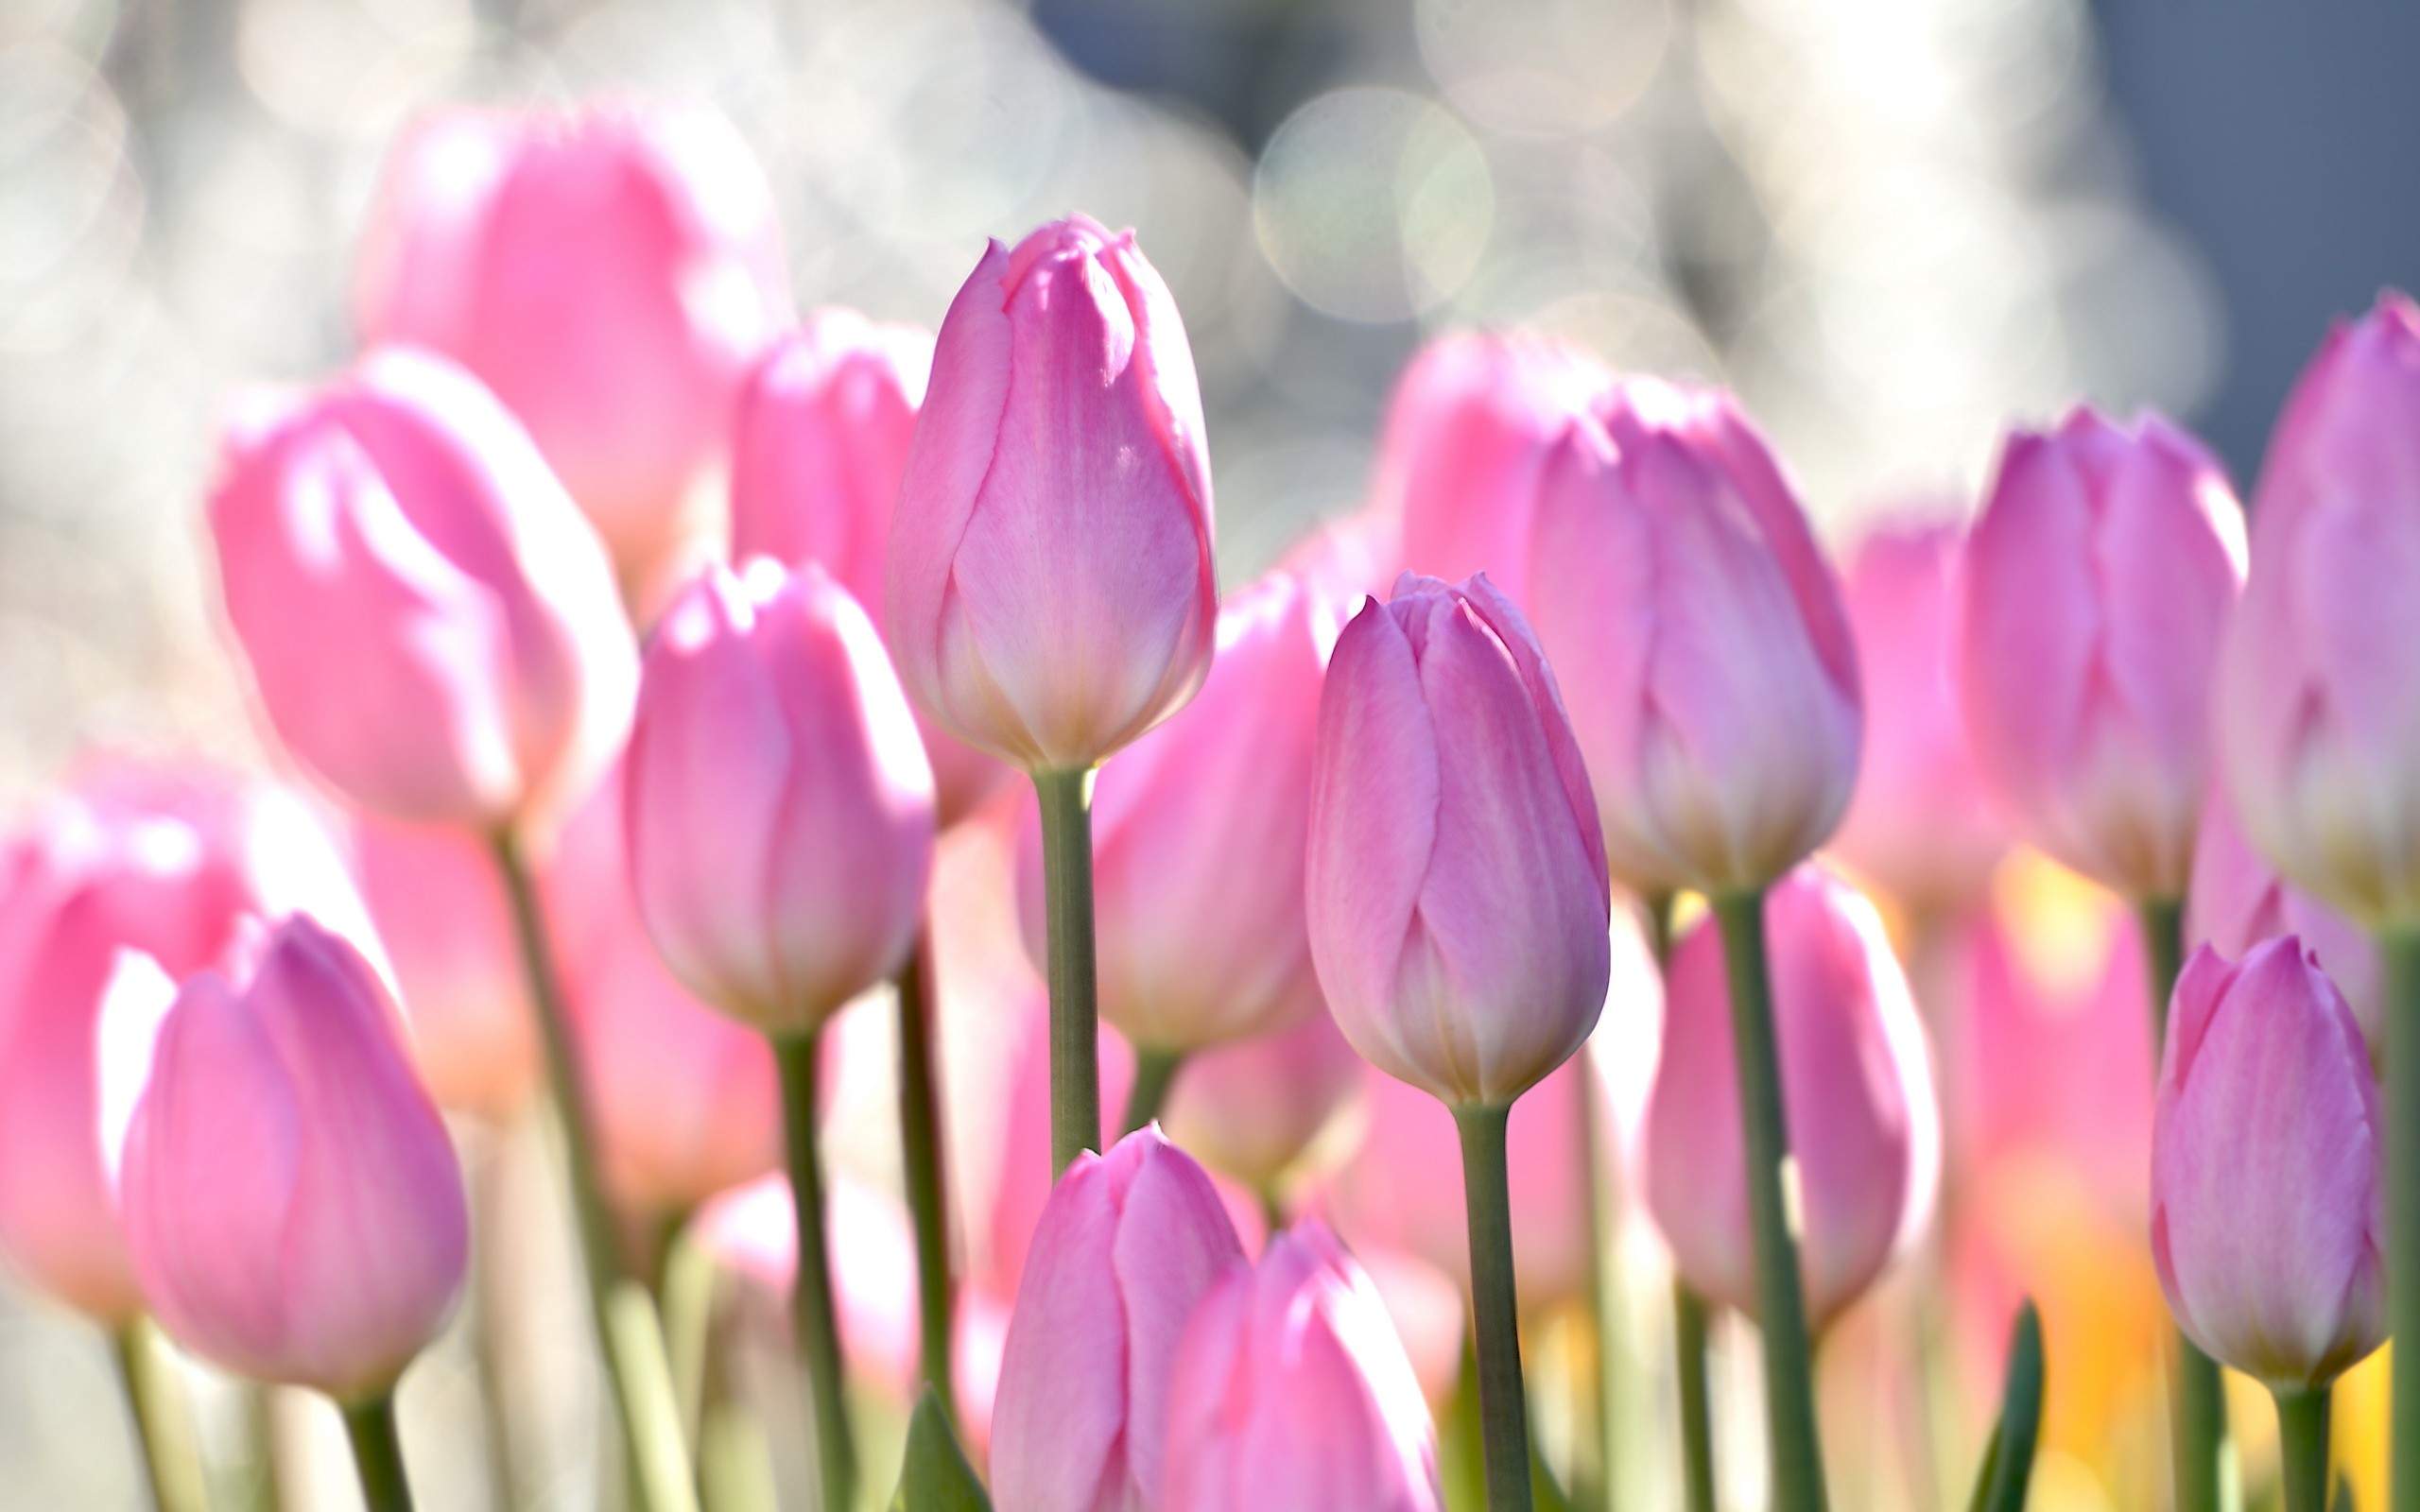 Tulips Pink Flowers Wallpaper HD For Desktop In High Quality